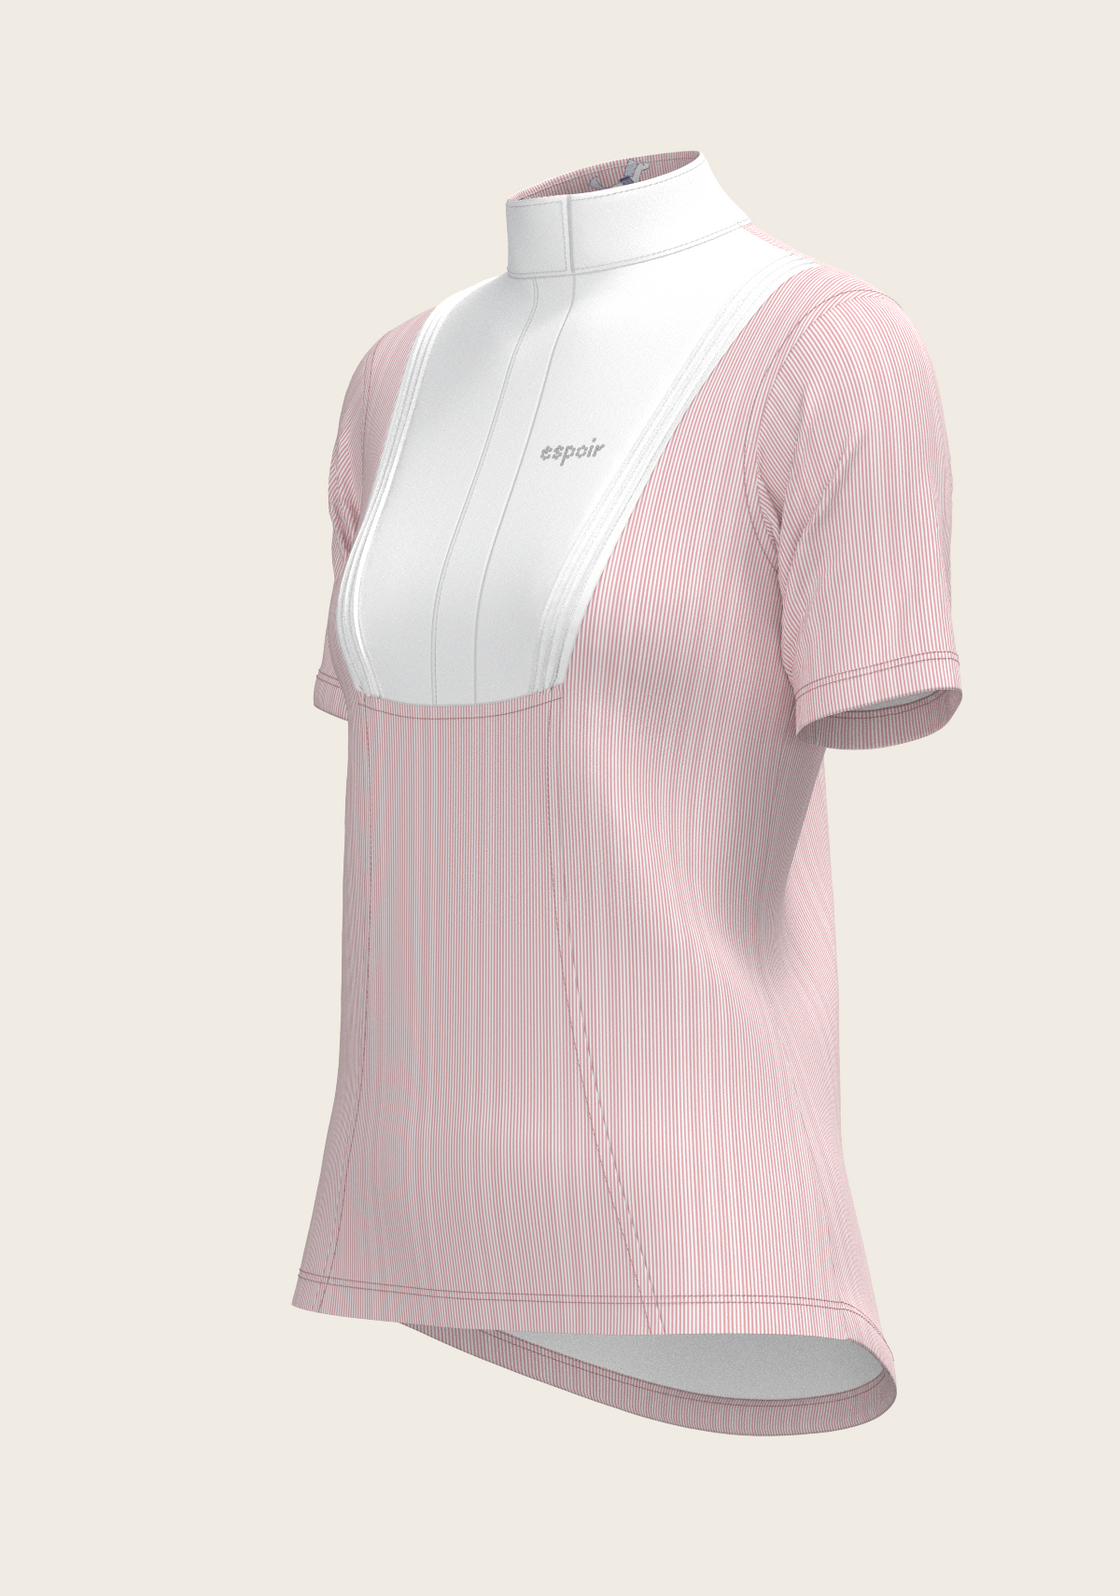 Stripes in Rose Short Pleated Short Sleeve Show Shirt